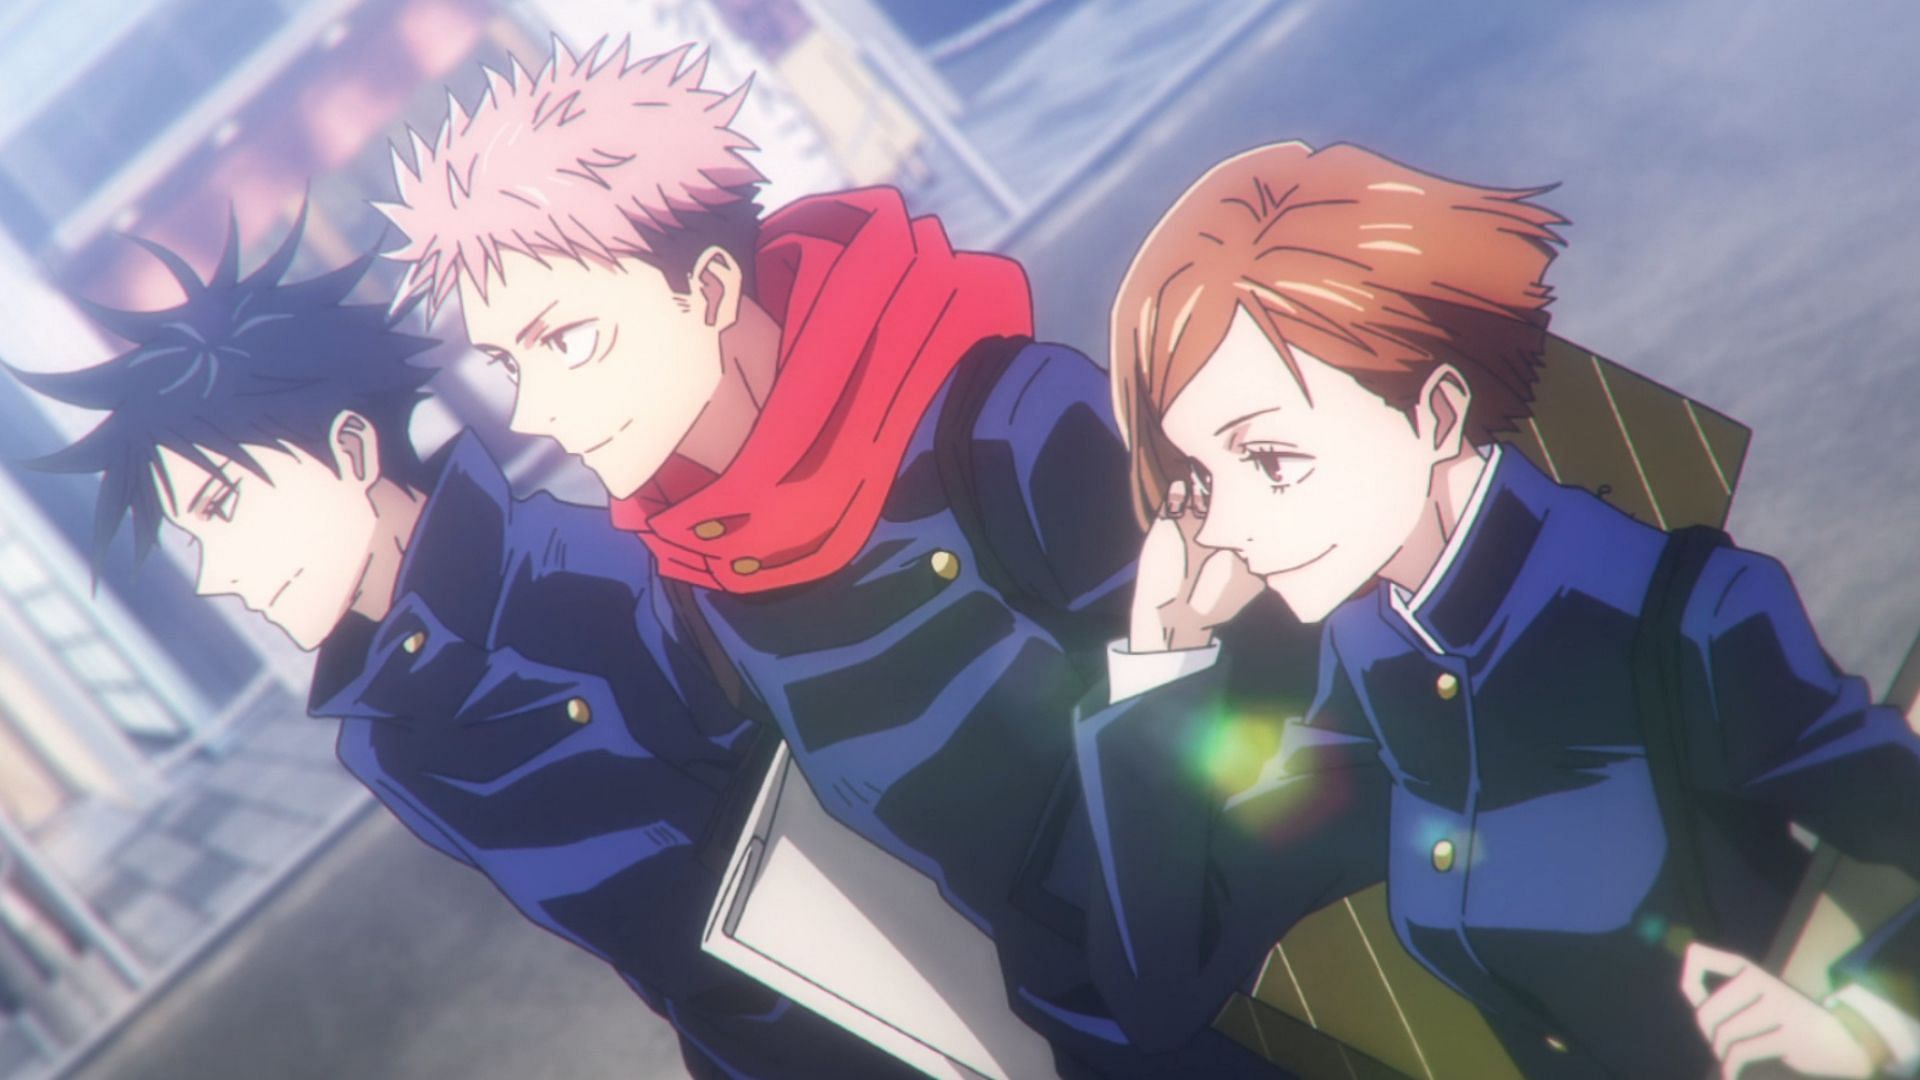 Where is Jujutsu Kaisen streaming as of 2022? All platforms revealed